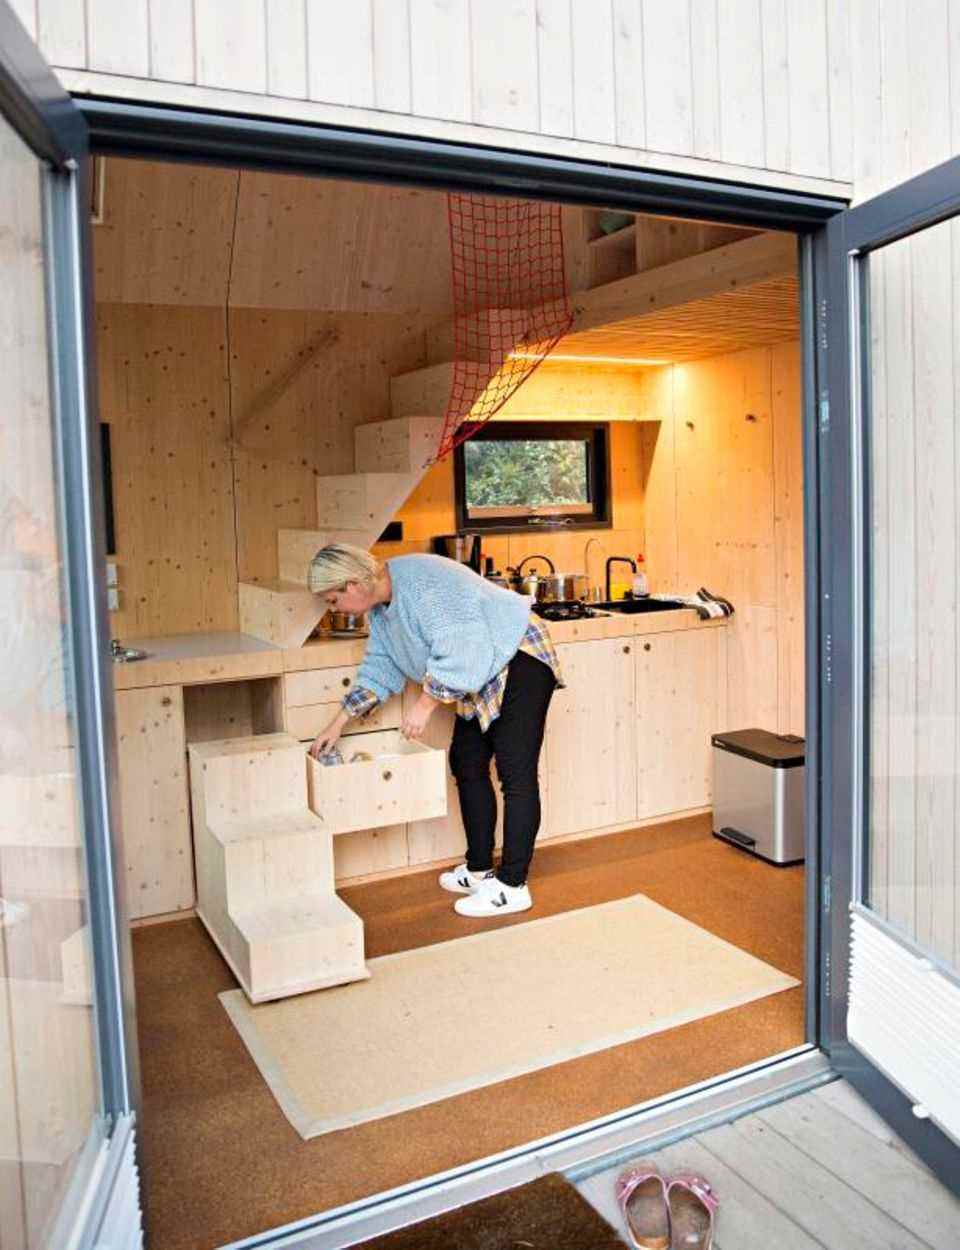 Time out in the Tiny House: Interior of the Tiny House